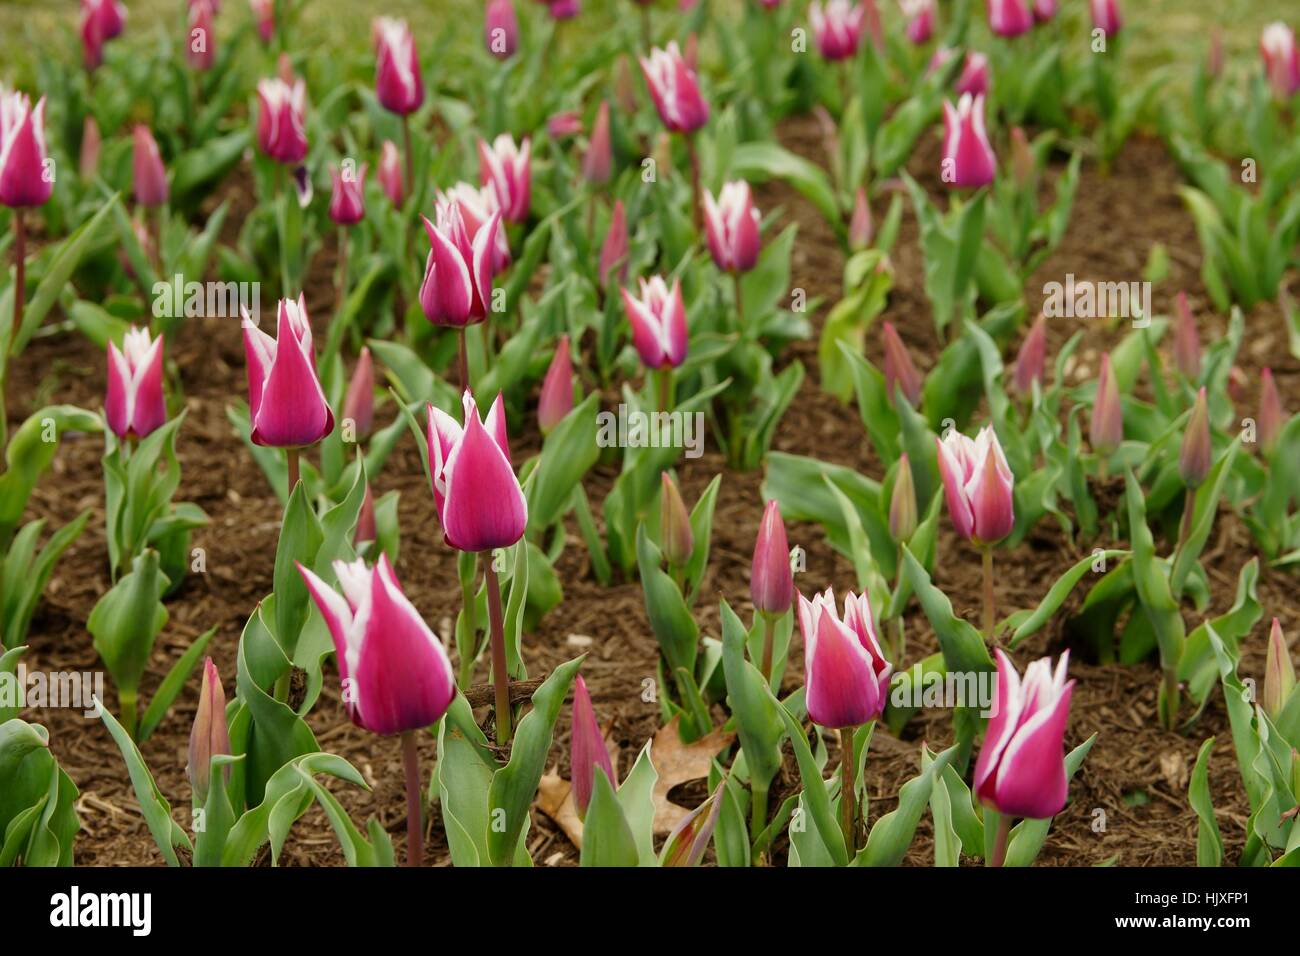 Multiple ballade tulips (lily-flowered tulips) in a flower bed Stock Photo